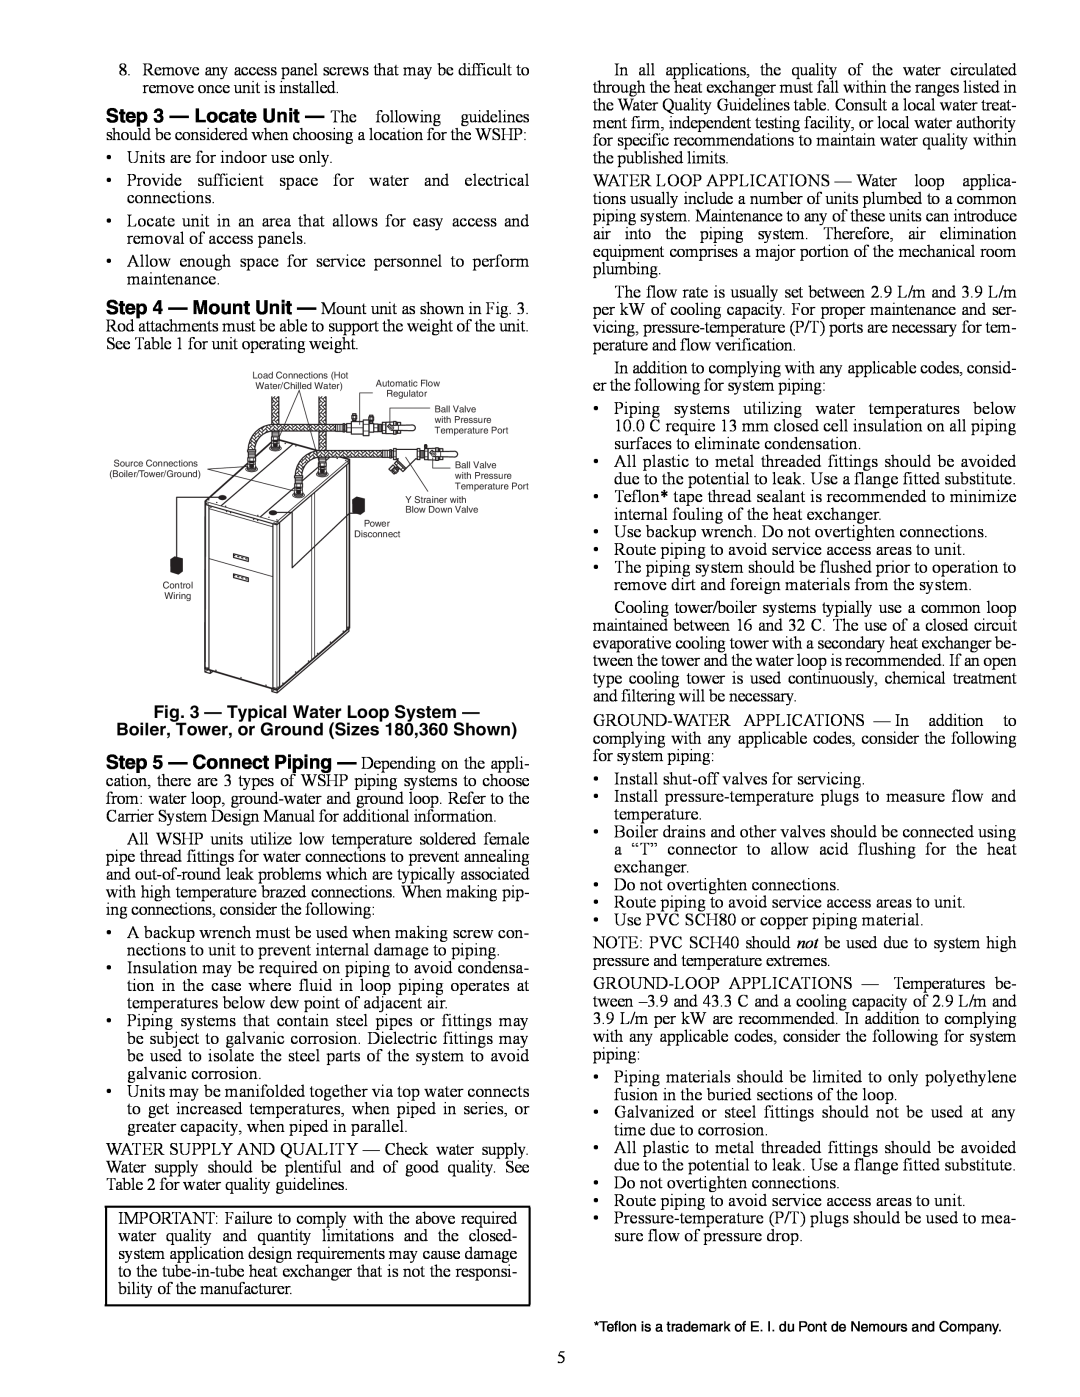 Carrier 50PSW036-360 specifications Typical Water Loop System, Boiler, Tower, or Ground Sizes 180,360 Shown 